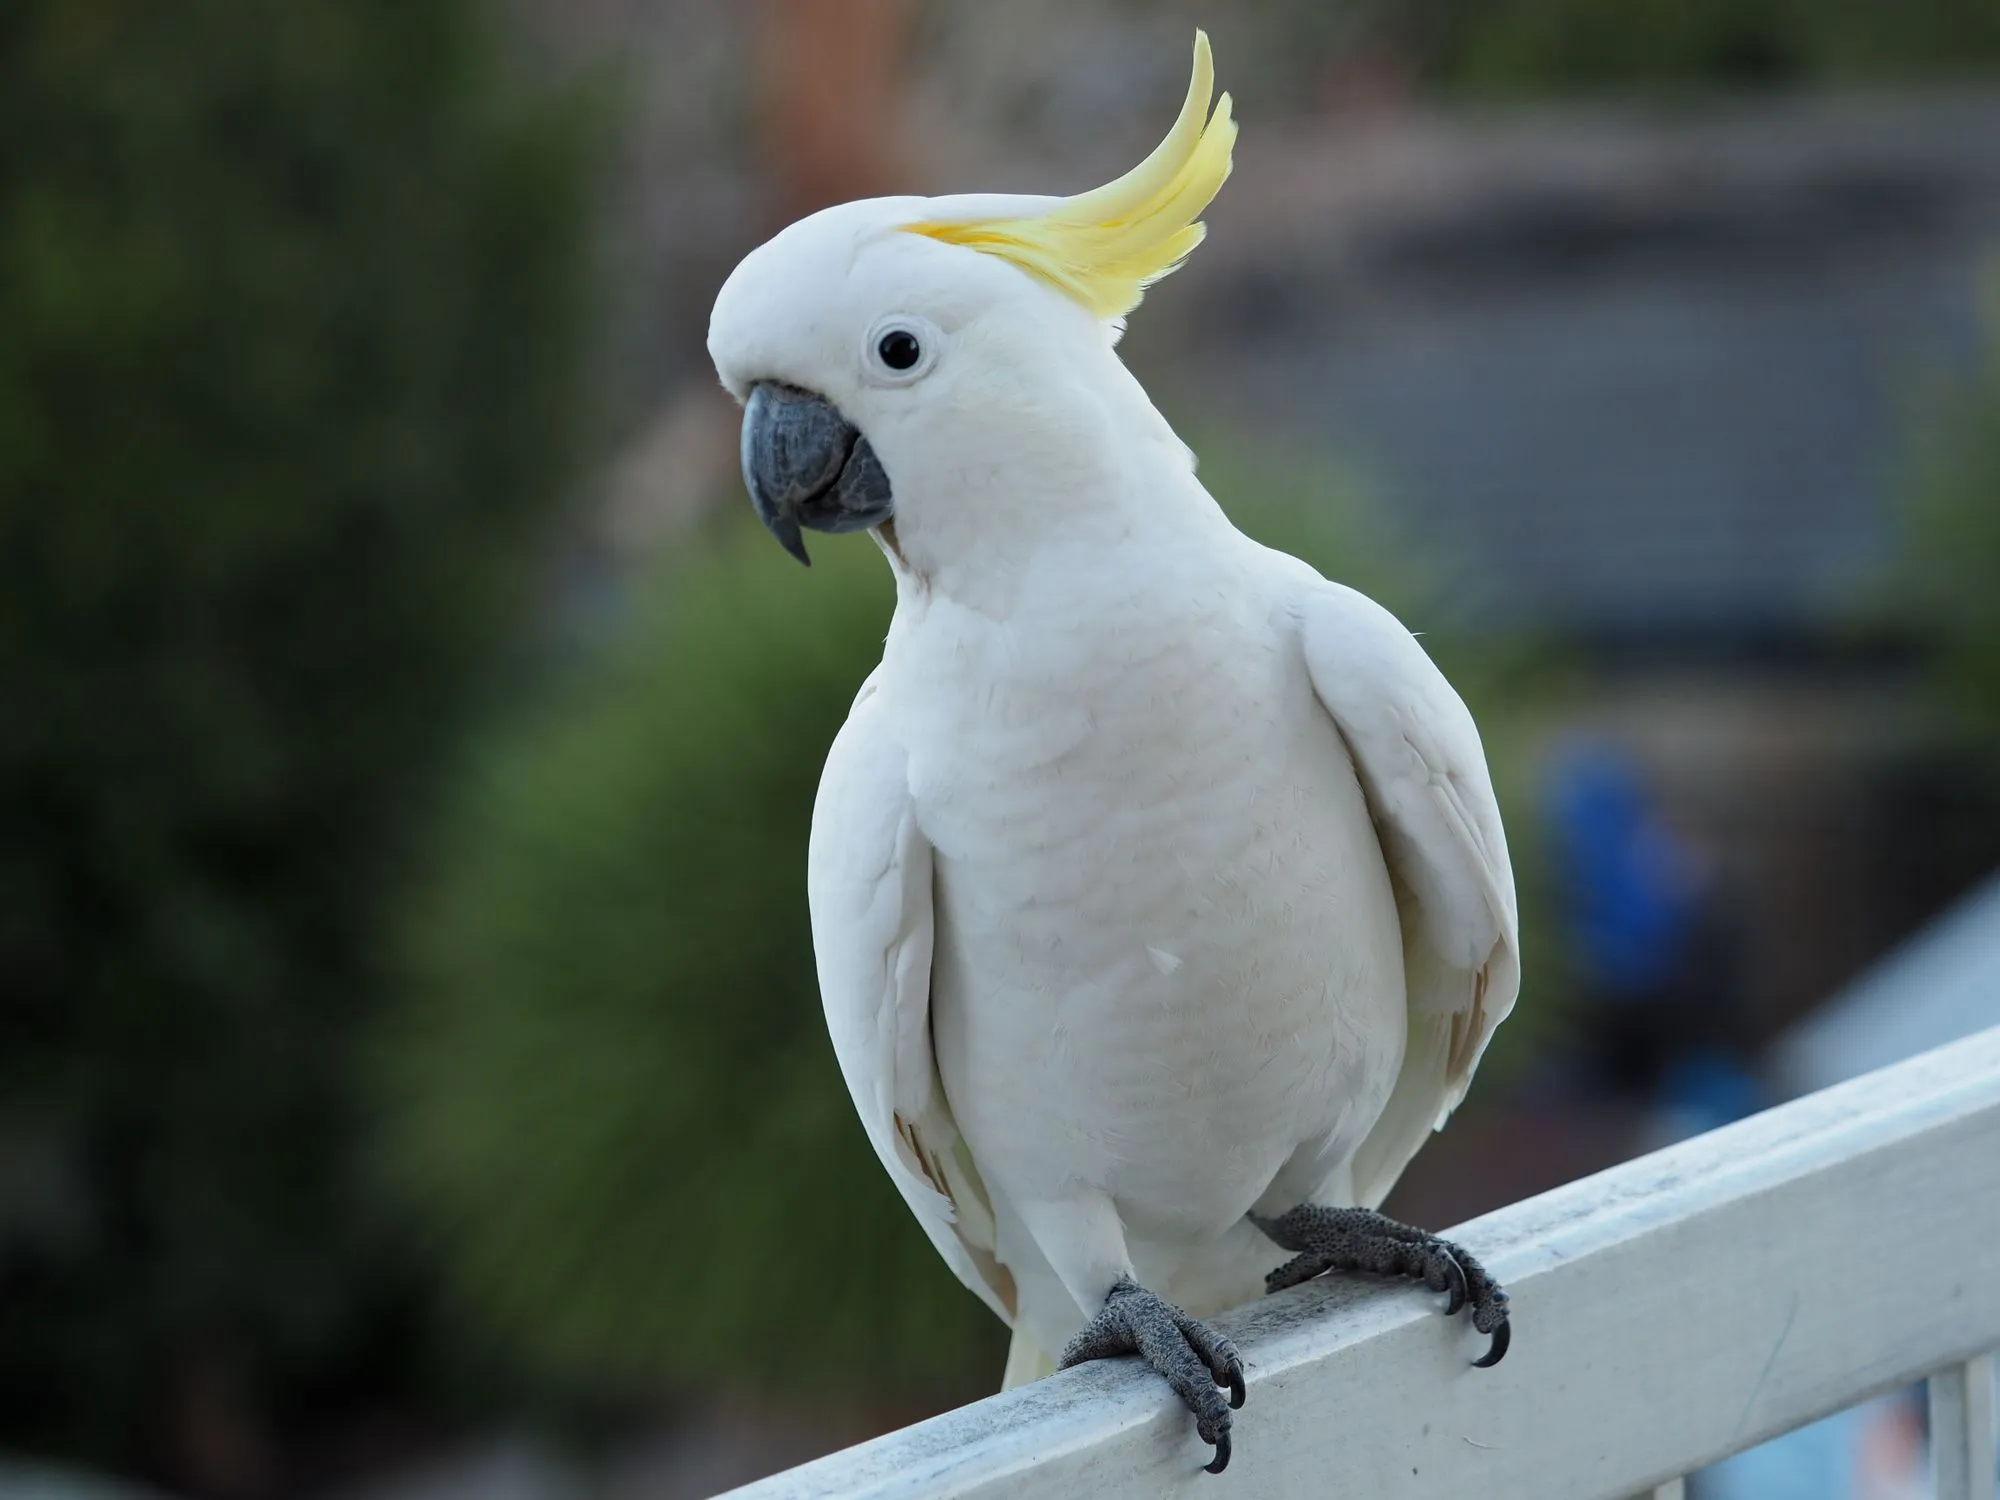 Wild cockatiels also have amazing appearance.